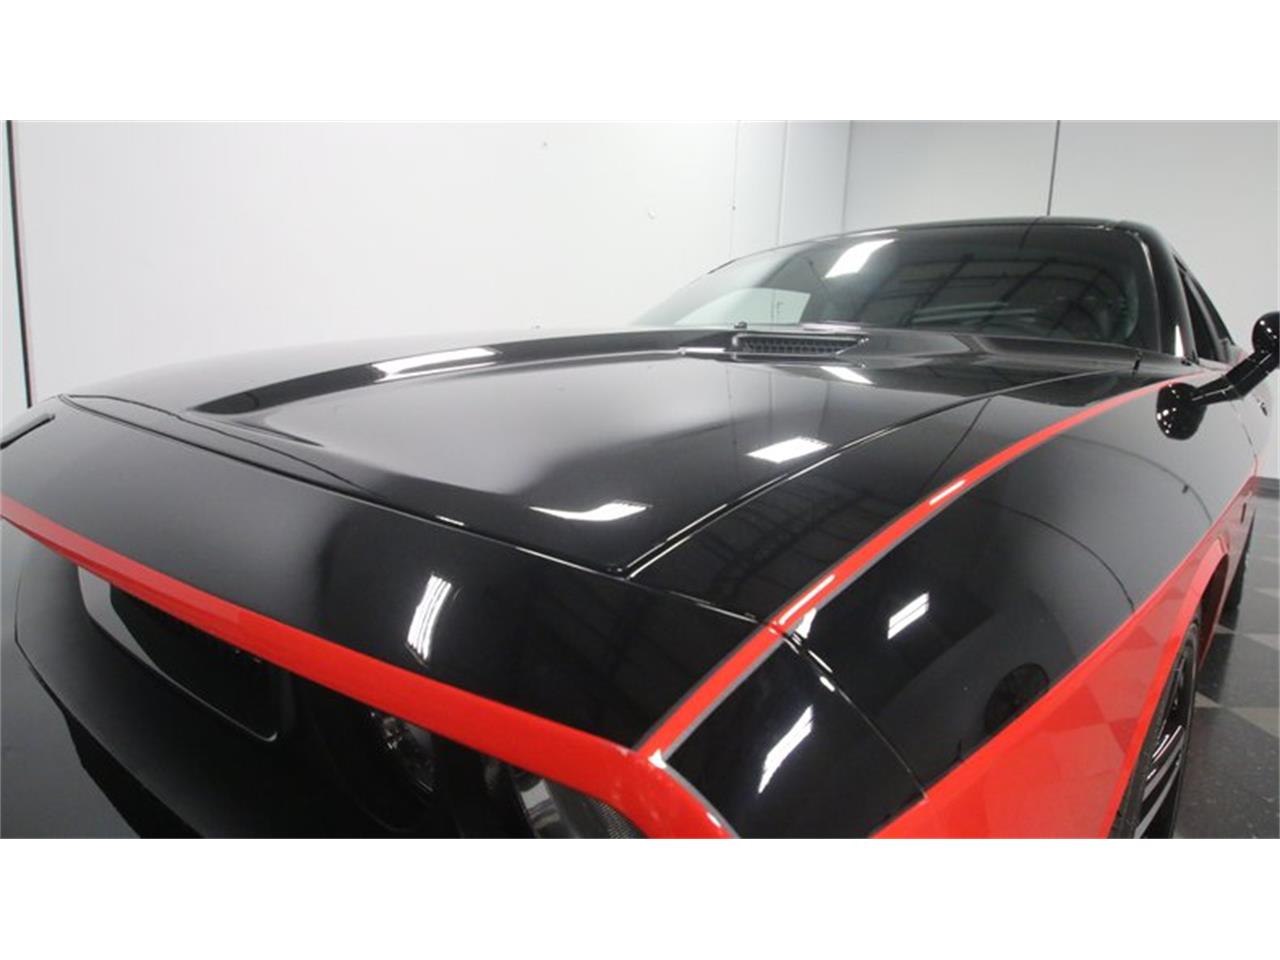 2010 Dodge Challenger for sale in Lithia Springs, GA – photo 71